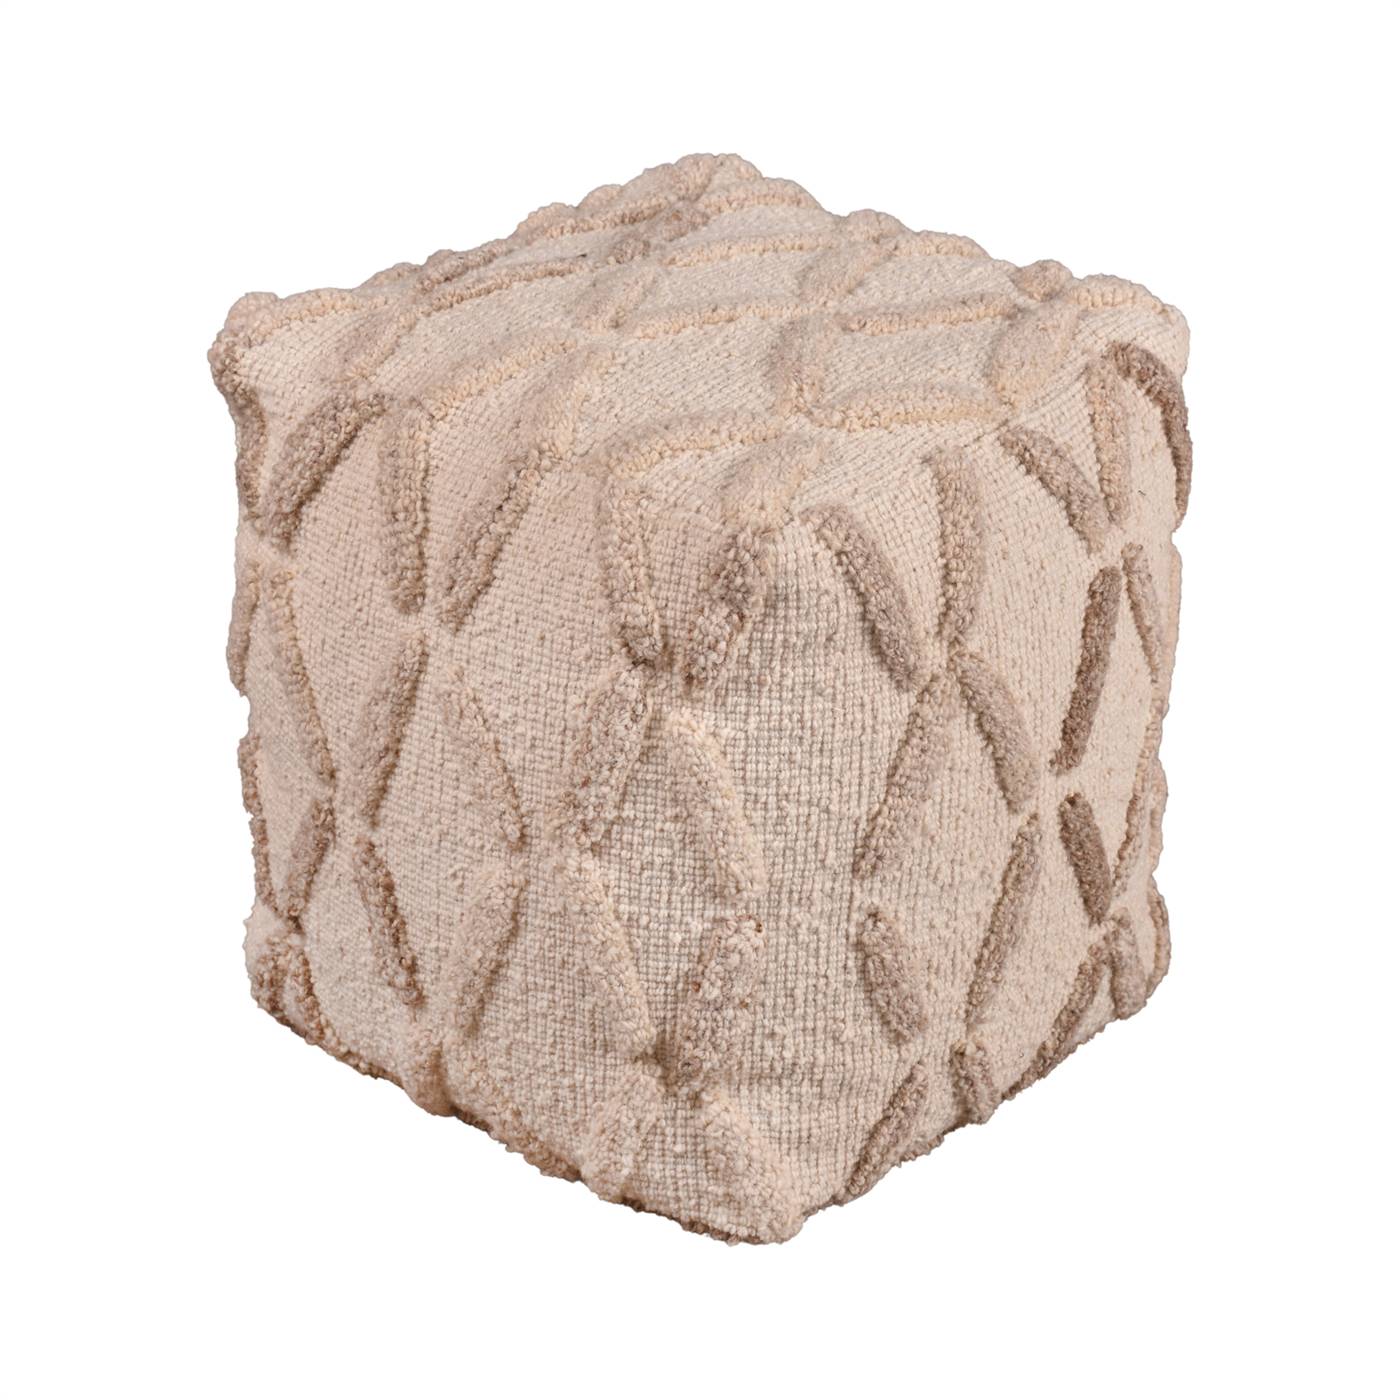 Koven Pouf, 40x40x40 cm, Natural White, Wool, Hand Woven, Over Tufted, Handwoven, All Loop